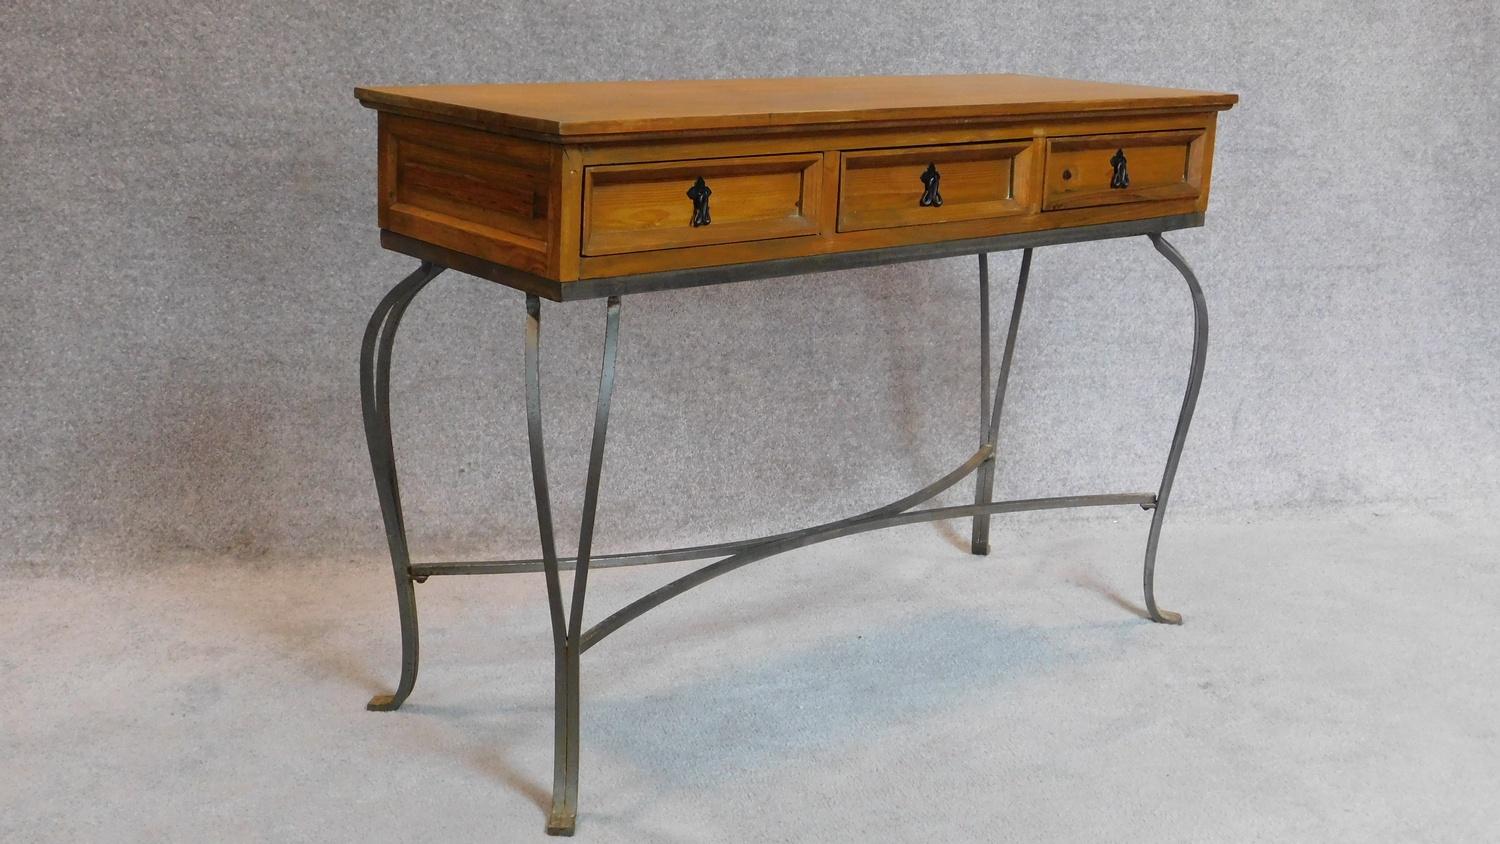 20th Century pitch pine console table with three drawers on cabriole wrought iron legs. - Image 3 of 4